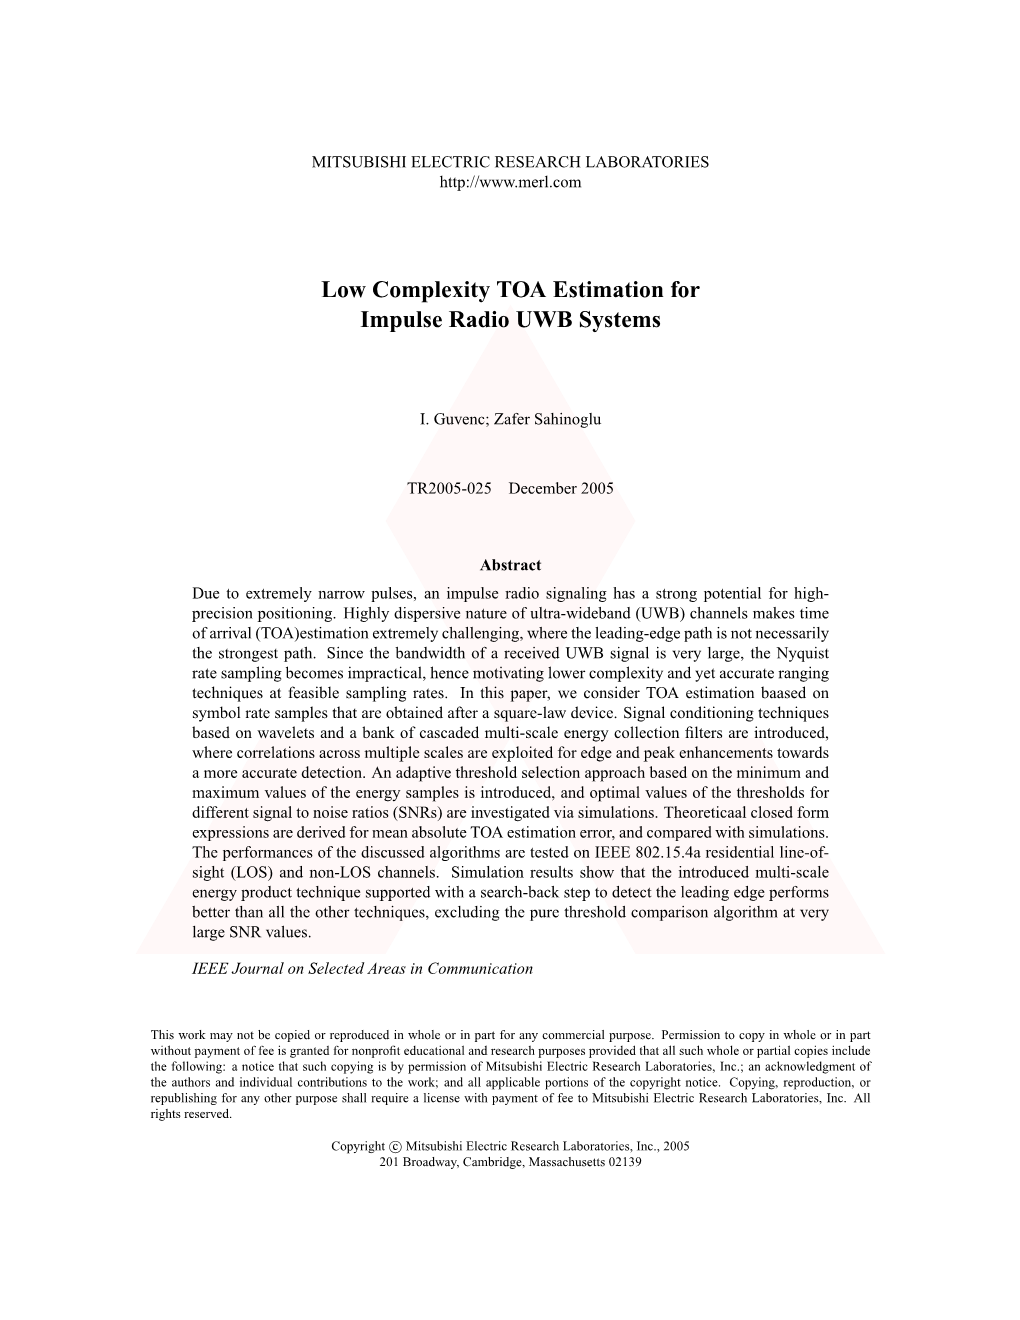 Low Complexity TOA Estimation for Impulse Radio UWB Systems